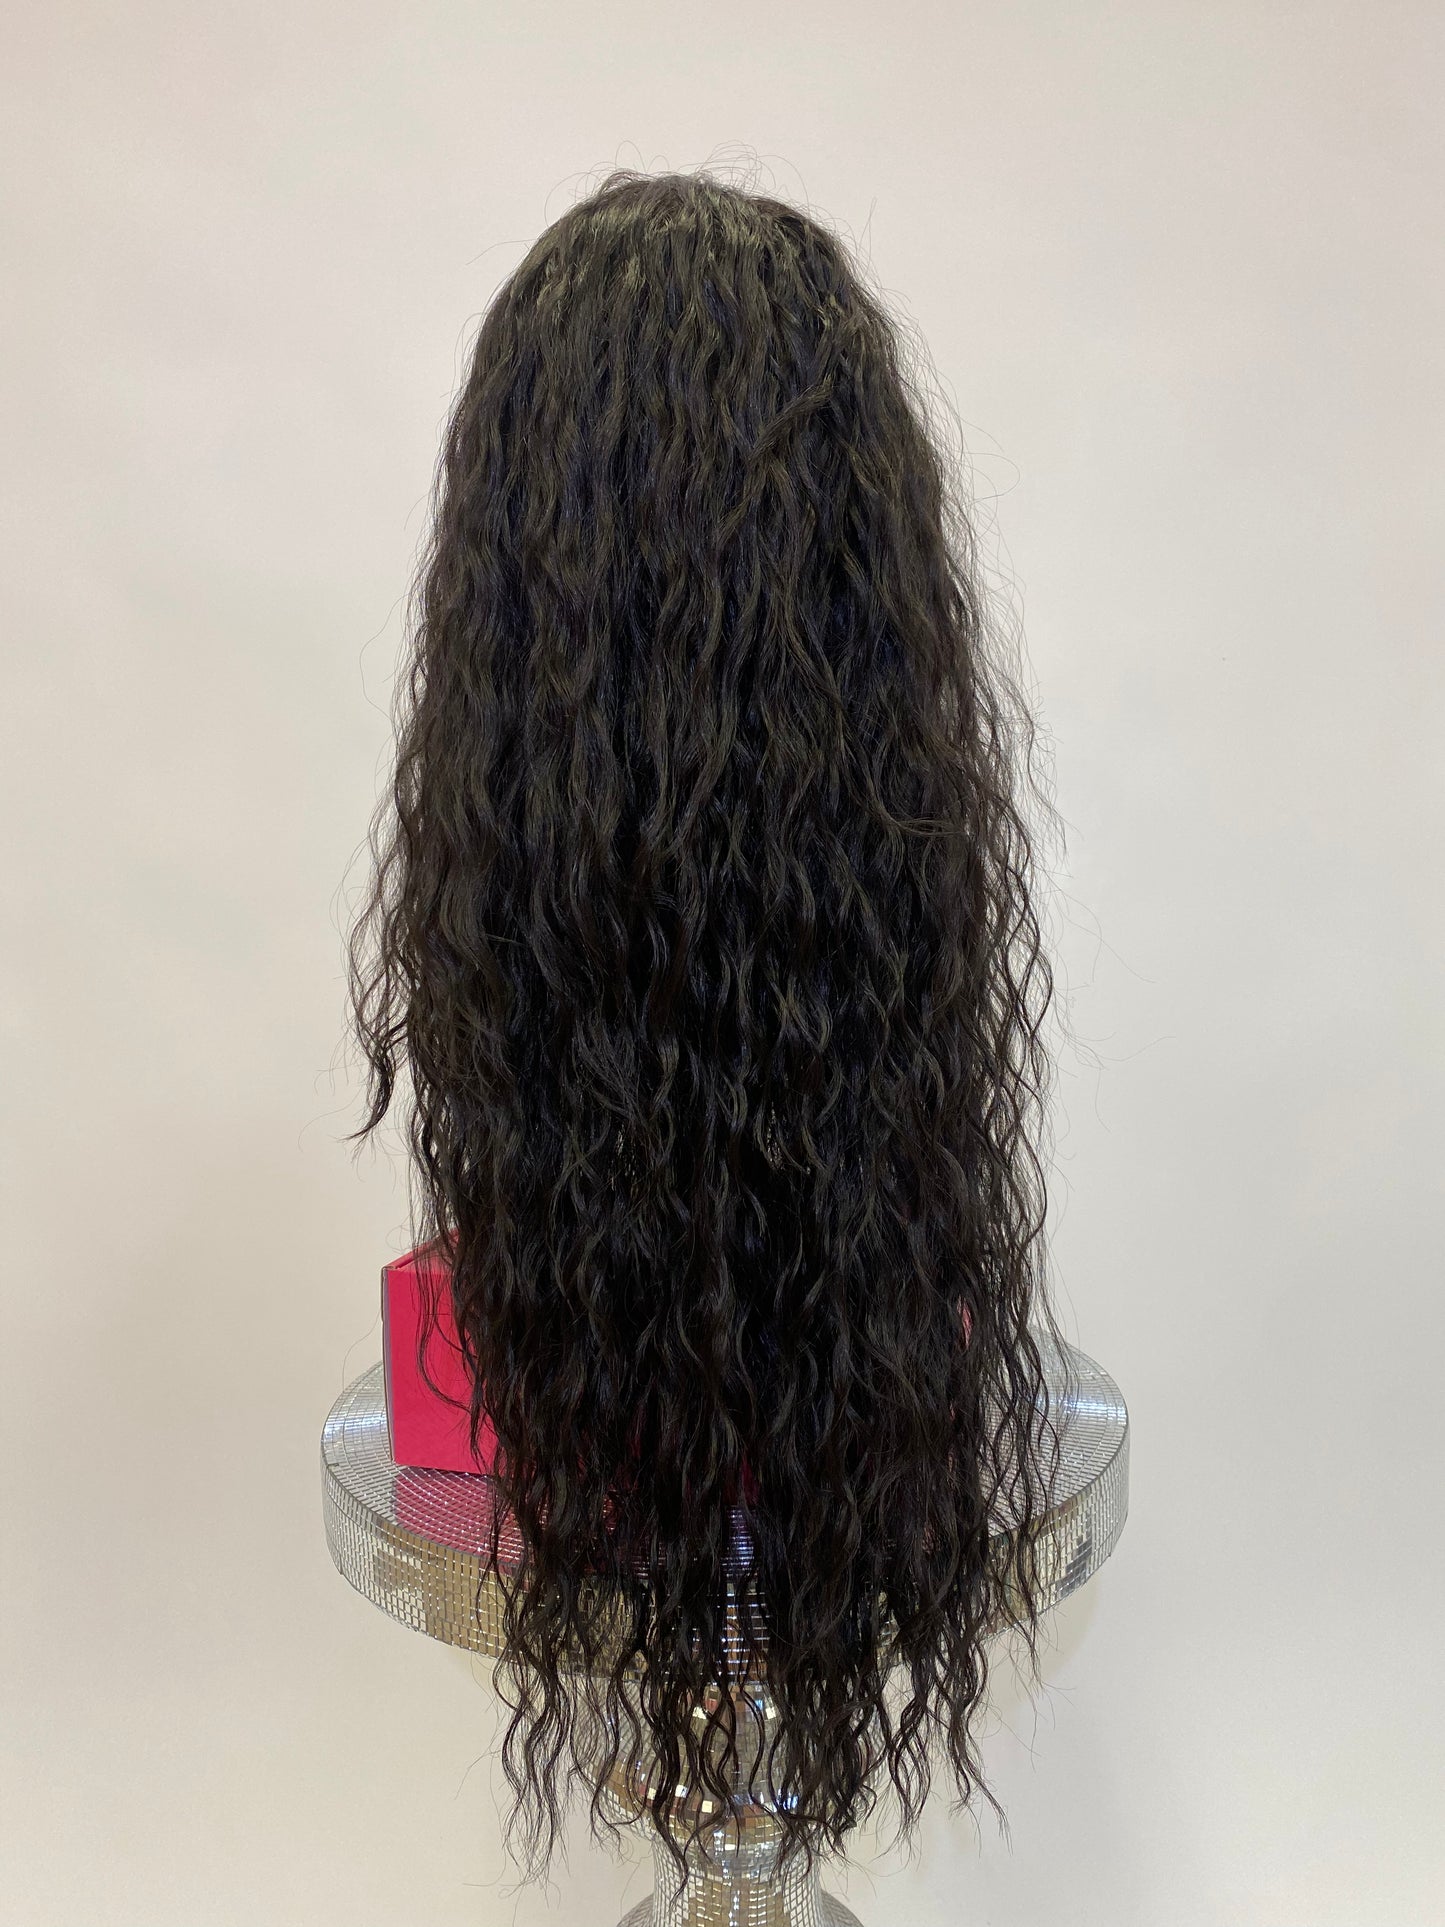 249 Erica - 13x4 Free Part Lace Front Wig - 2 - DaizyKat Cosmetics 249 Erica - 13x4 Free Part Lace Front Wig - 2 DaizyKat Cosmetics Wigs